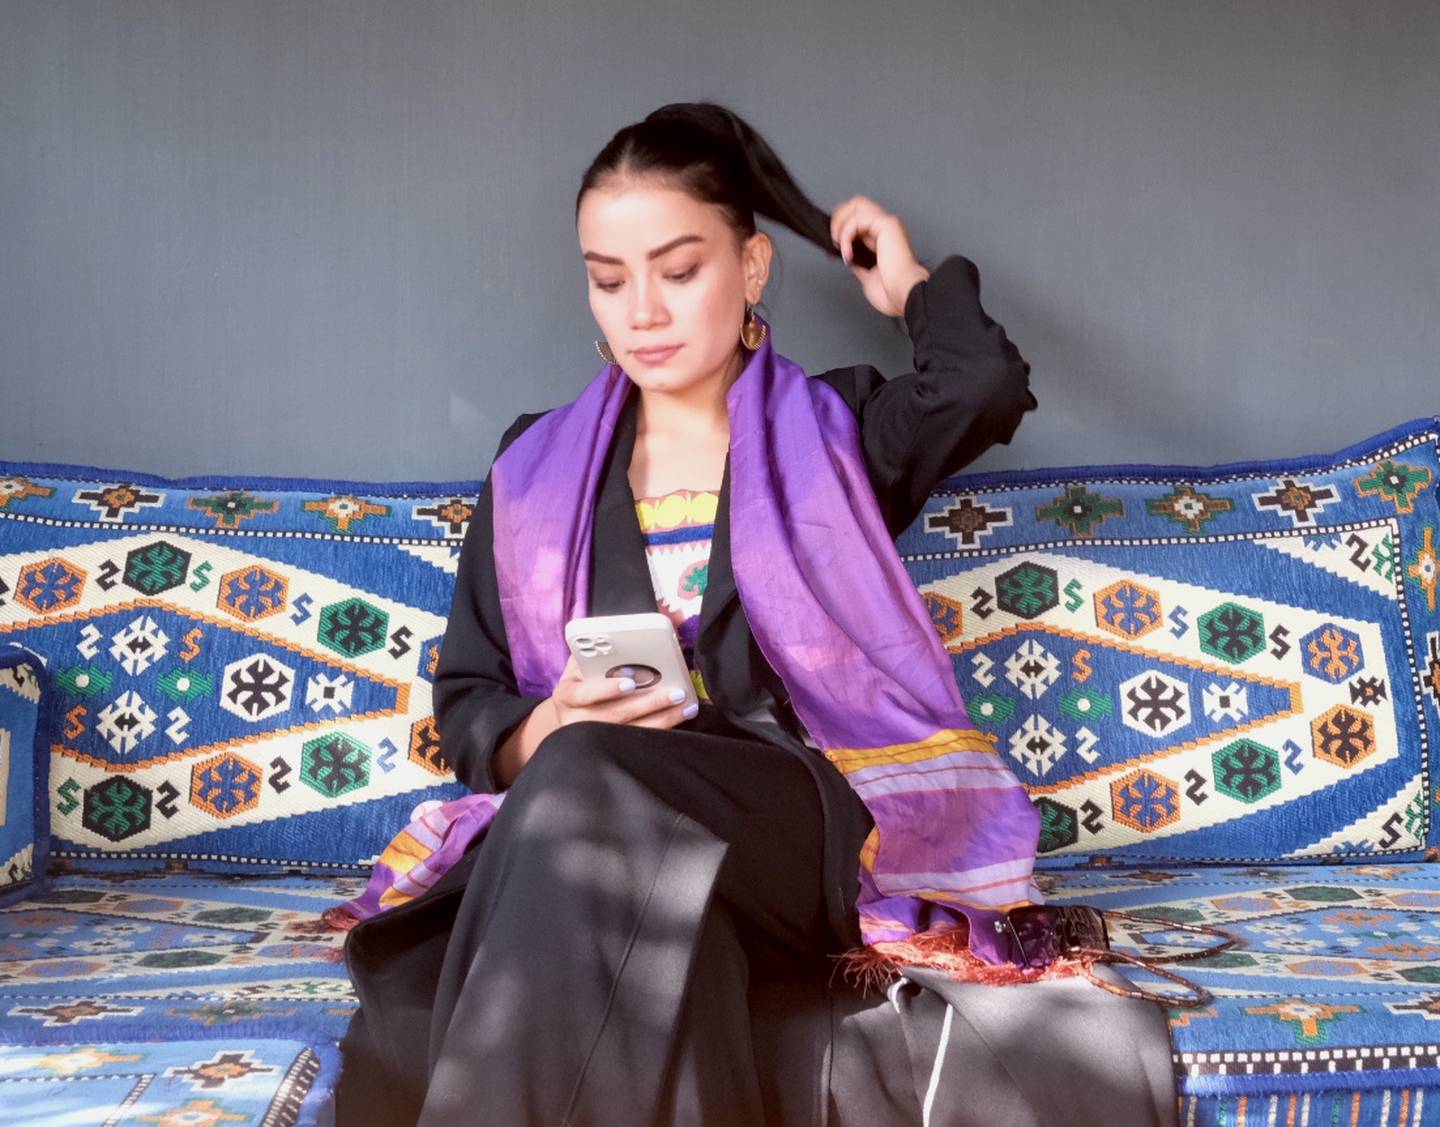 Karima Katayon, owner of an Afghan clothing brand and TikTok influencer who stayed in Afghanistan after the Taliban took over. Photo: Ali M Latifi